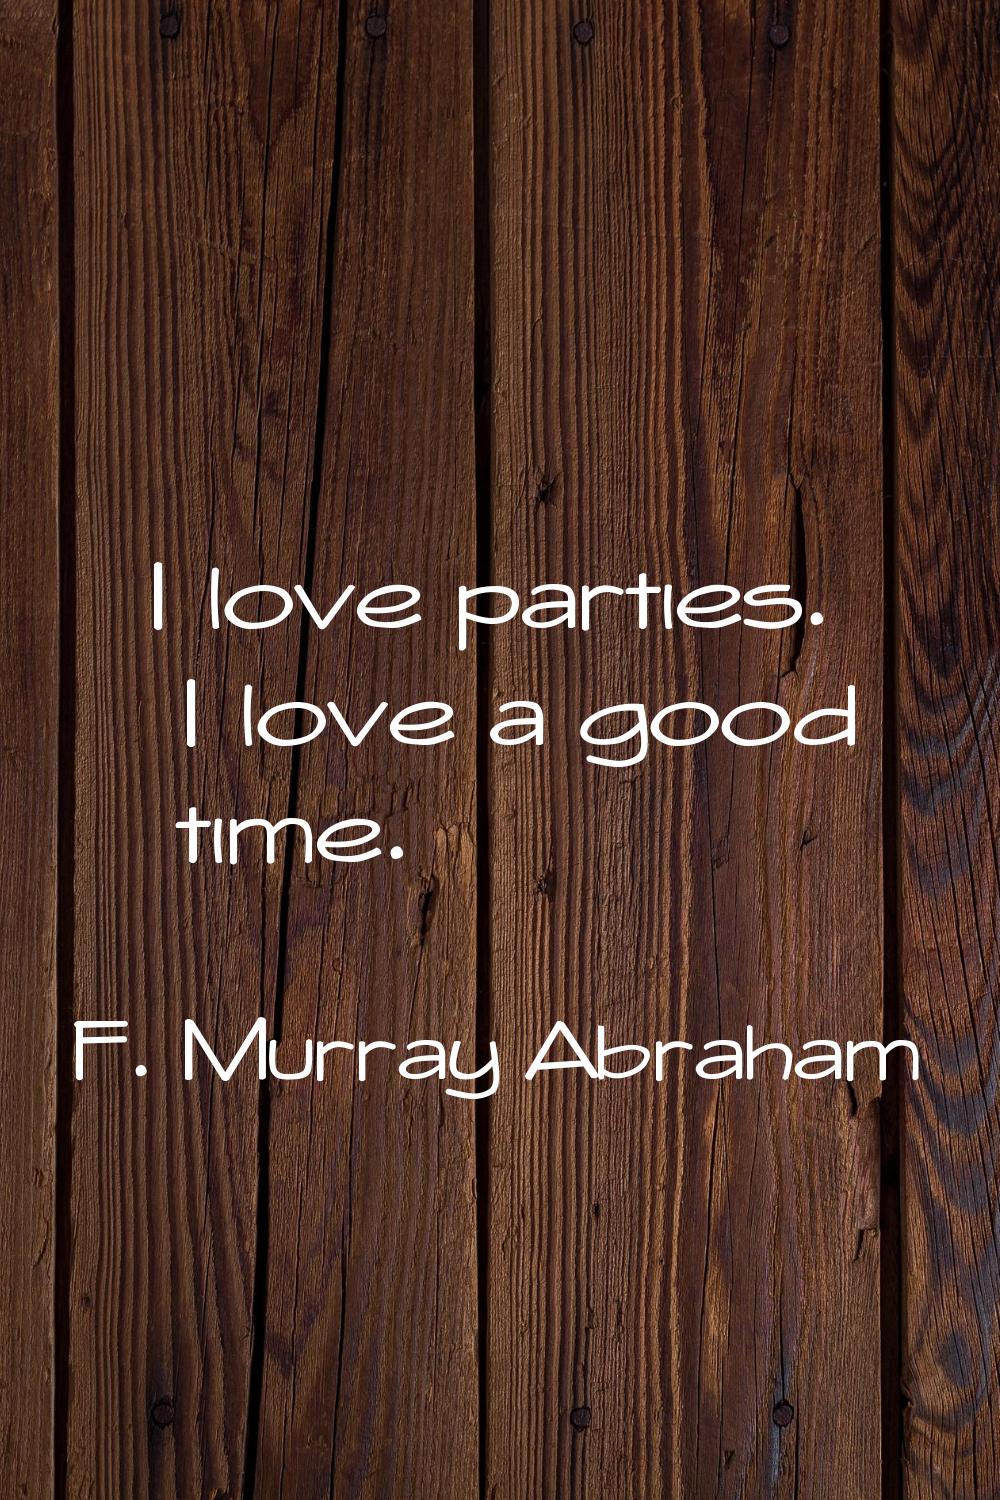 I love parties. I love a good time.